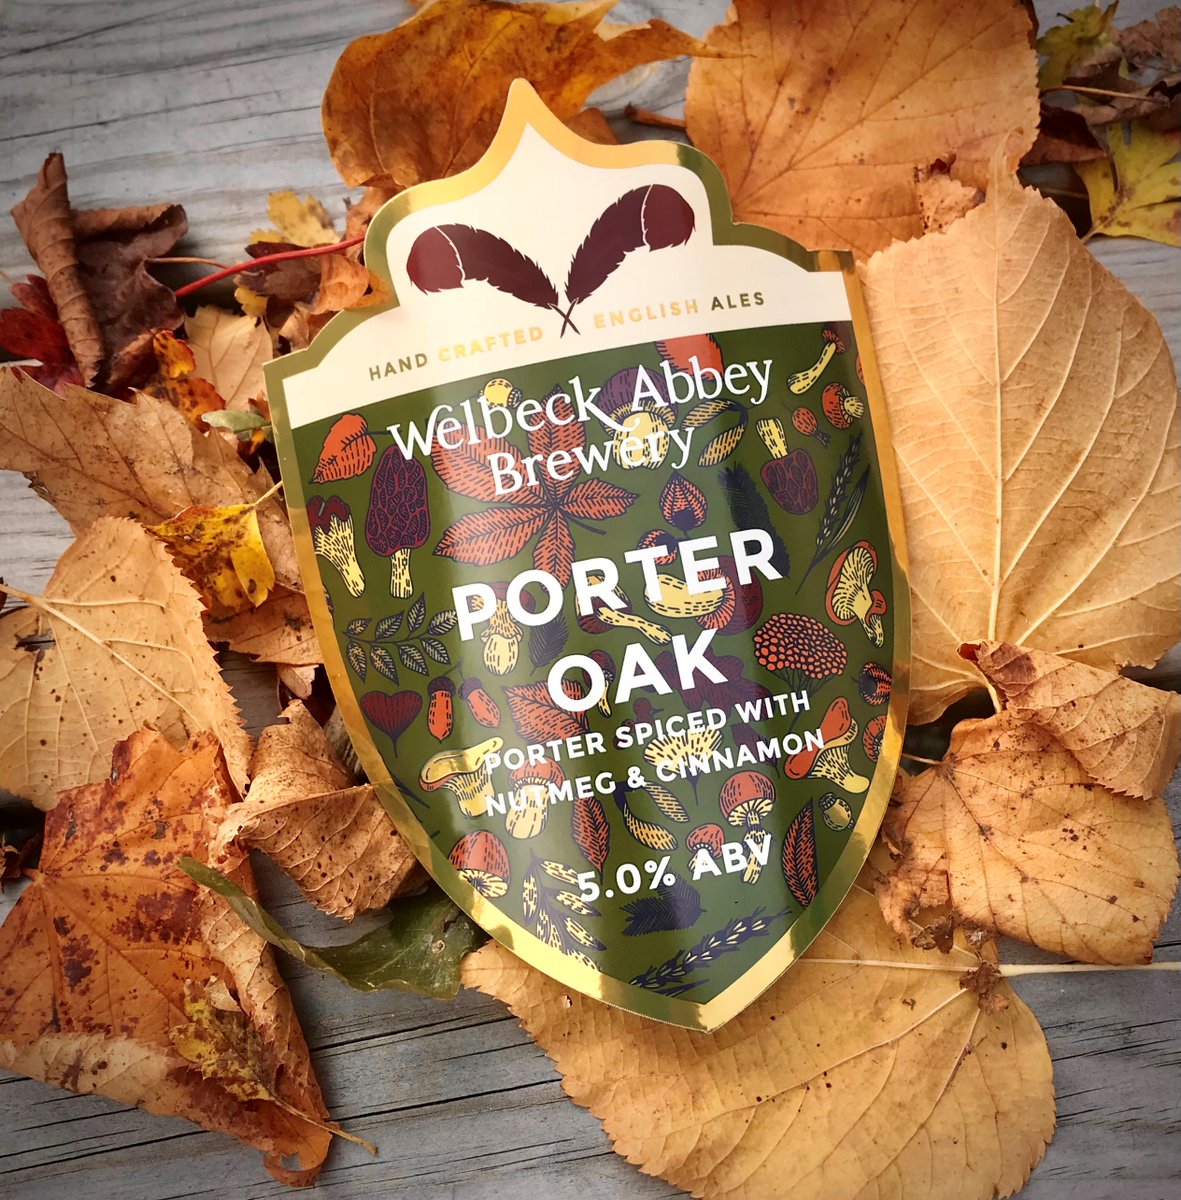 Our awesomely Autumnal 'Porter Oak' has flown out and all 30 casks are now in pubs across the region. Have you tried it yet?! This is a robust, aromatic porter with a subtle sprinkling of traditional spices, including nutmeg and cinnamon. It's the perfect #October brew! 🍂